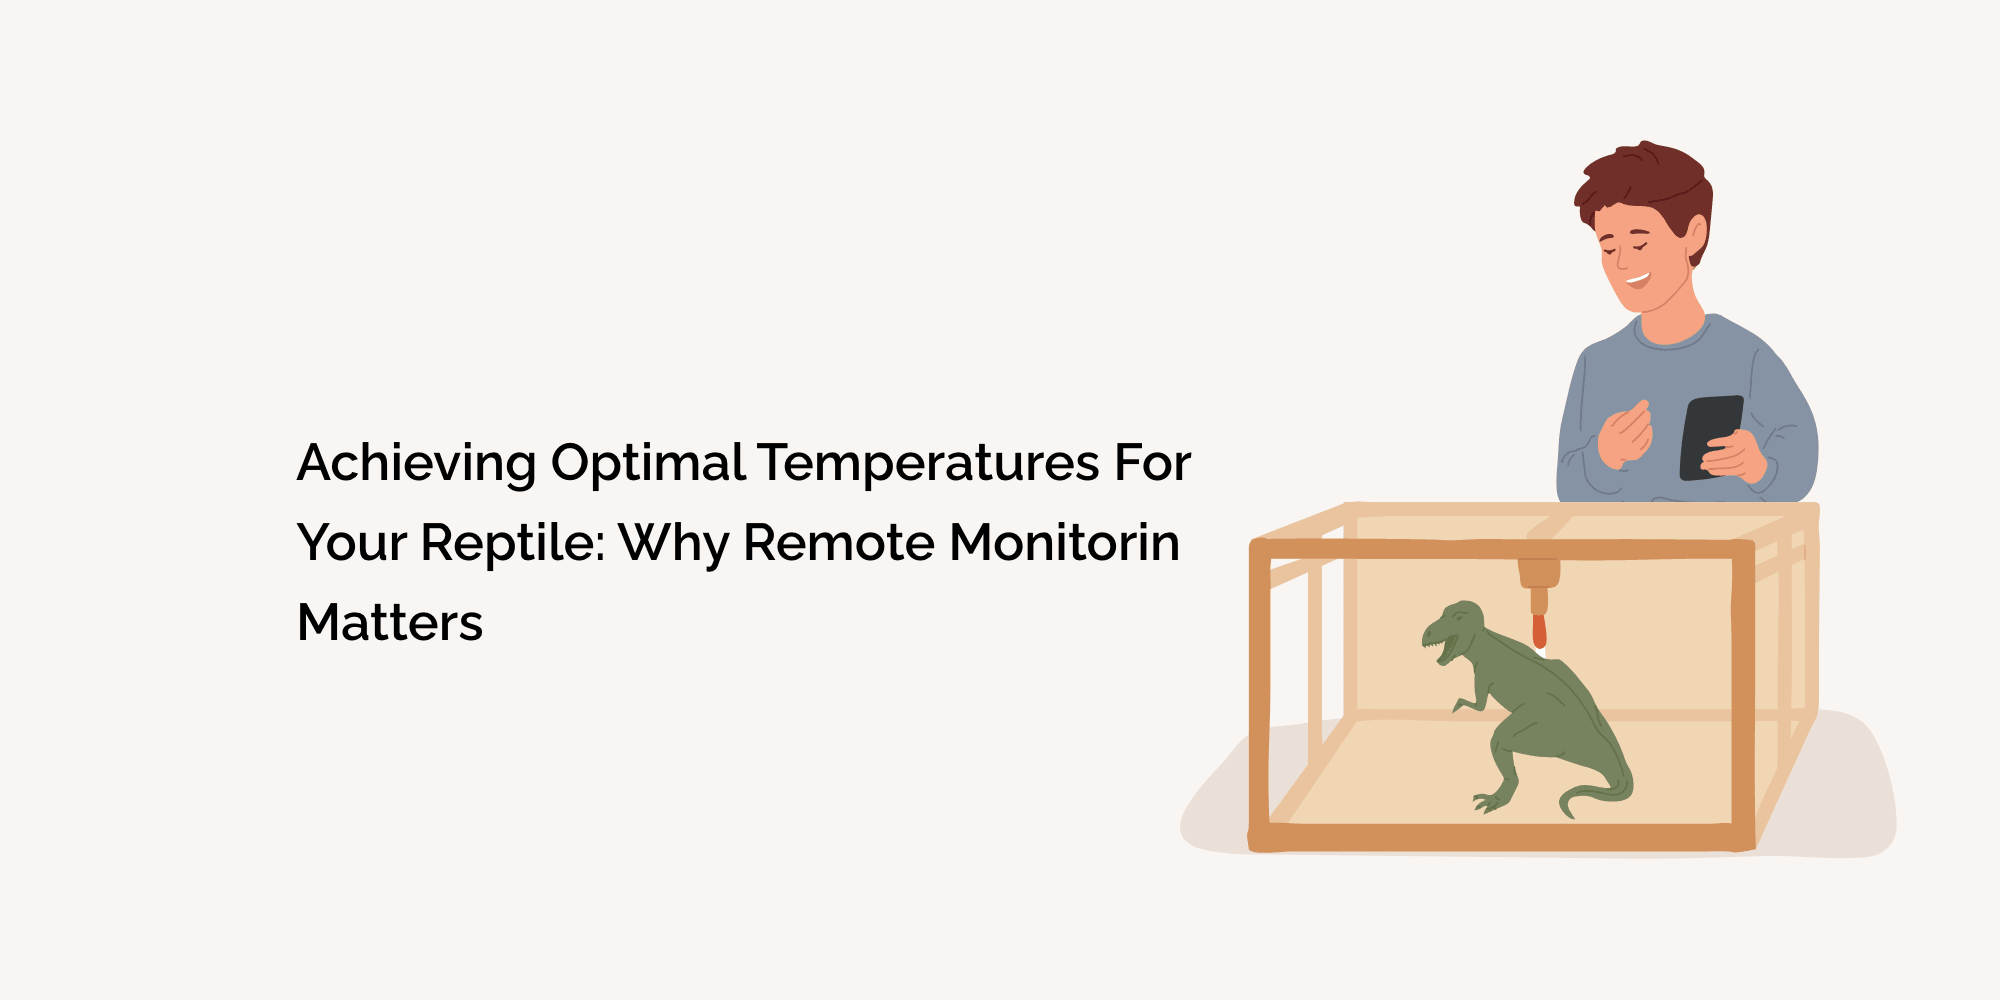 Achieving Optimal Temperatures for Your Reptile: Why Remote Monitoring Matters